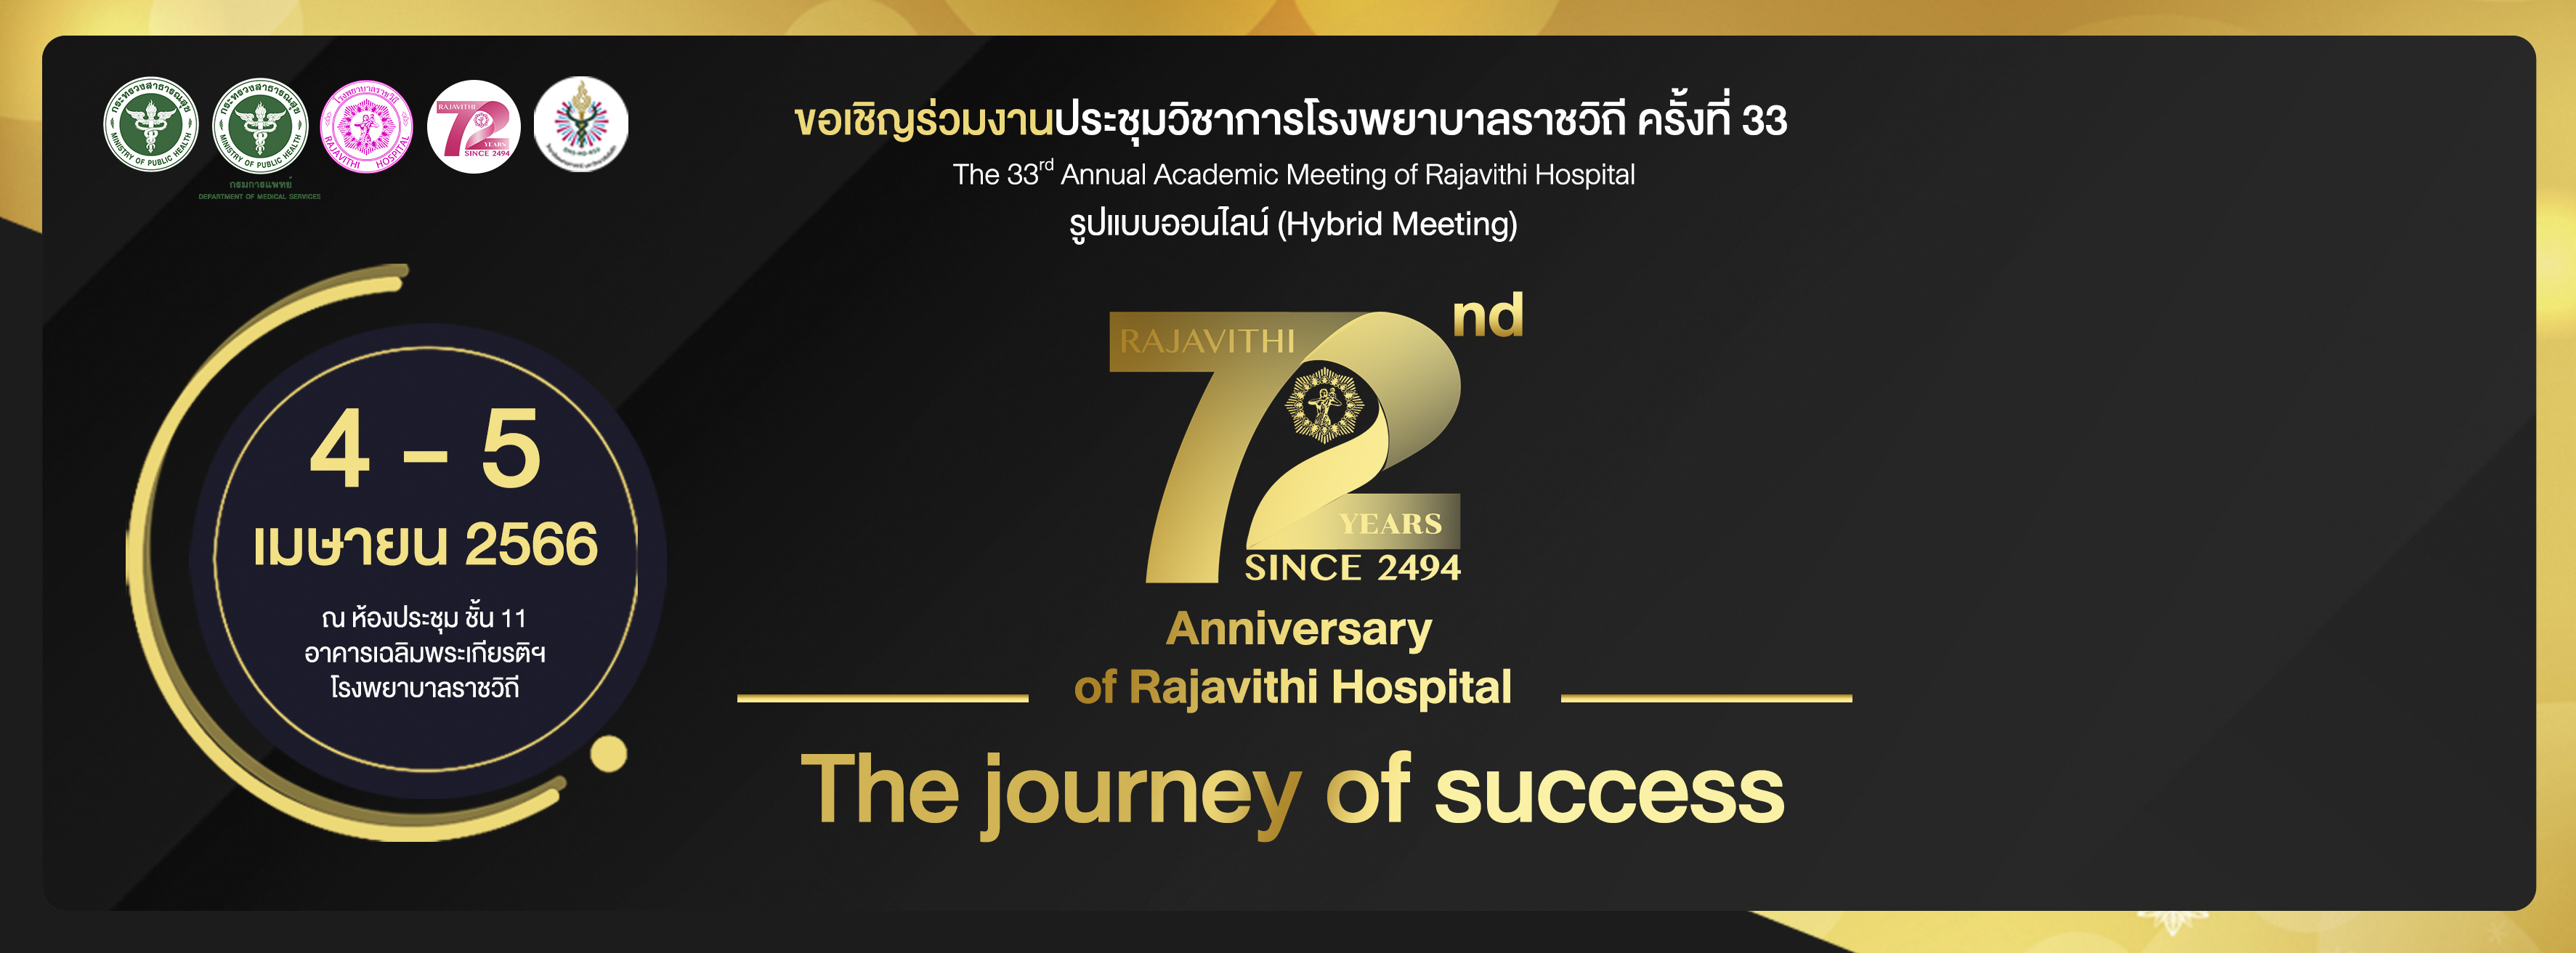 72nd Anniversary of Rajavithi Hospital: The journey of success